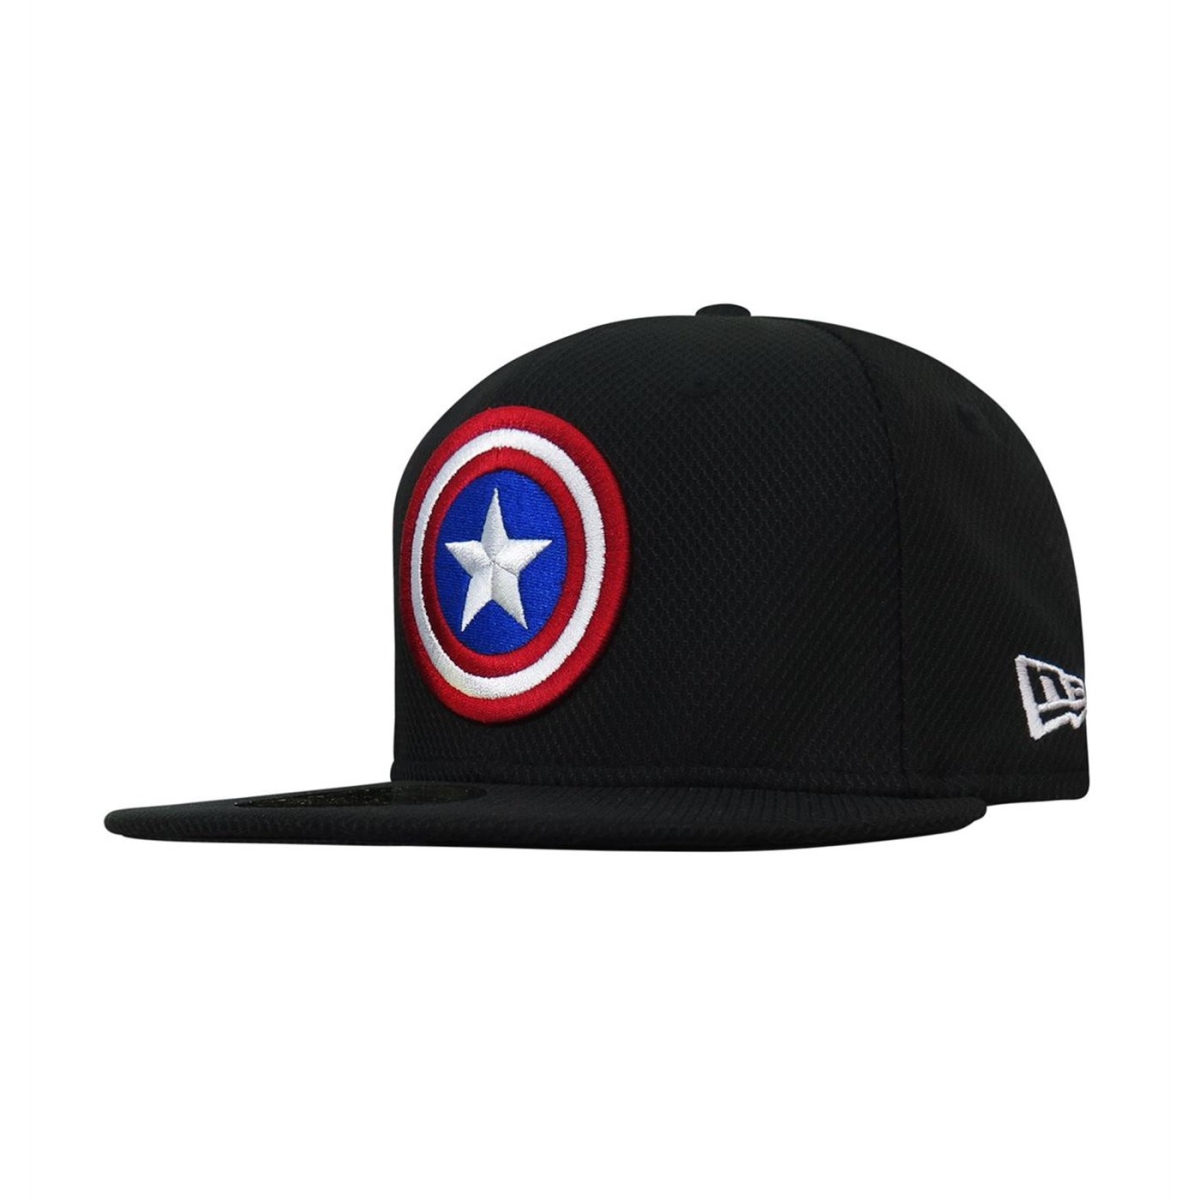 Picture of Captain America hatcapshldsym5950-738-7 3-8 Fitted Captain America Shield Black 59Fifty Fitted Hat - Size 7.375